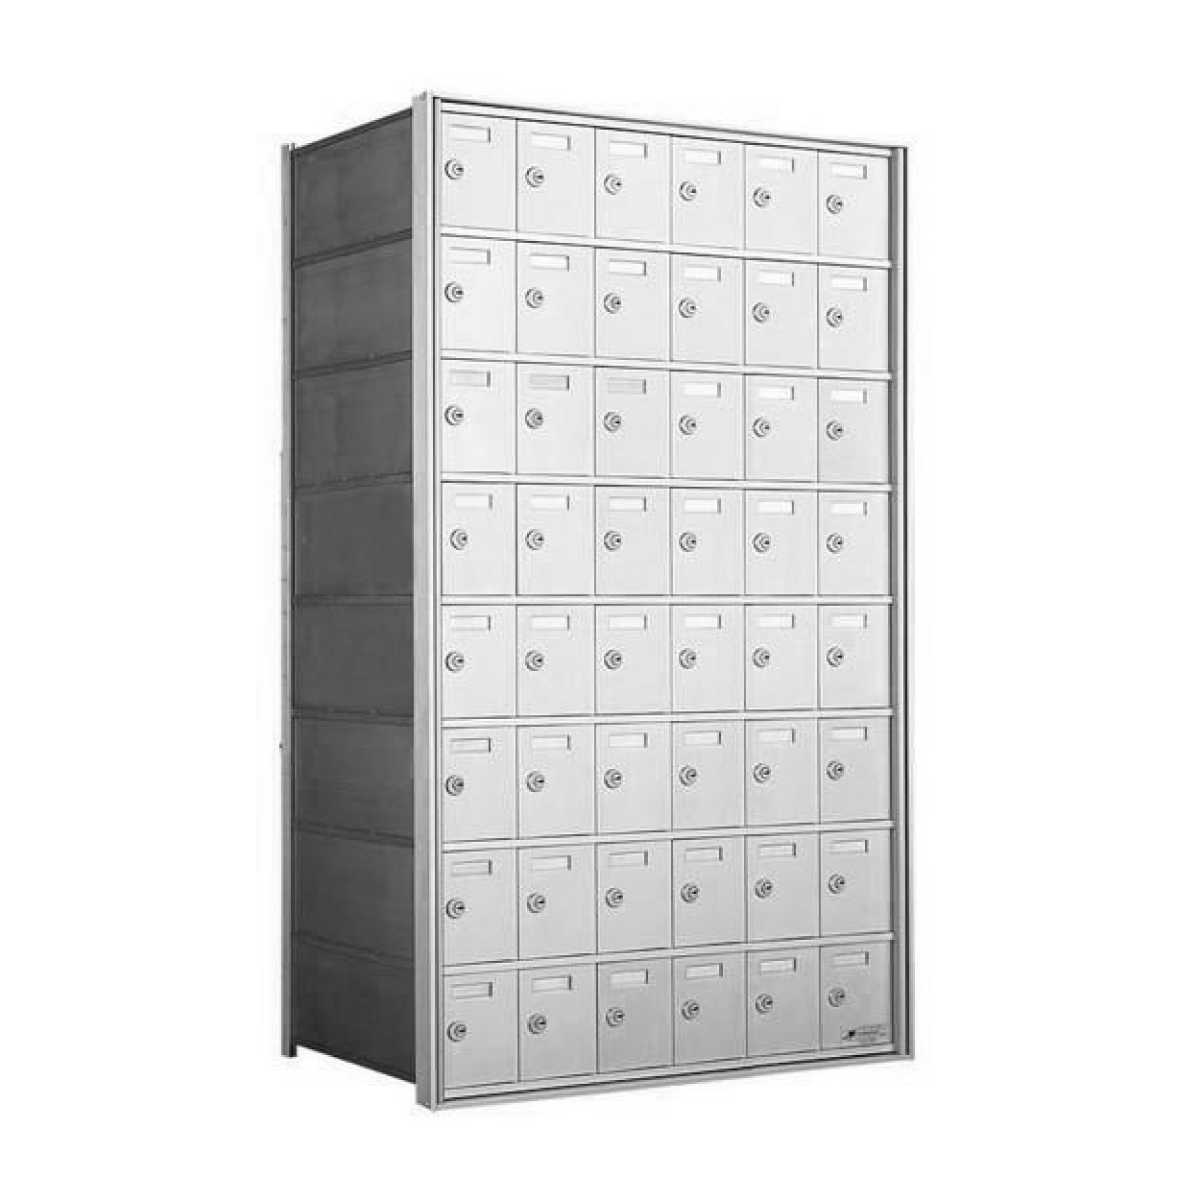 8 Doors High x 6 Doors (48 Tenants) 1700 Horizontal Mailbox Rear-Load Private Distribution in Anodized Aluminum Finish Product Image